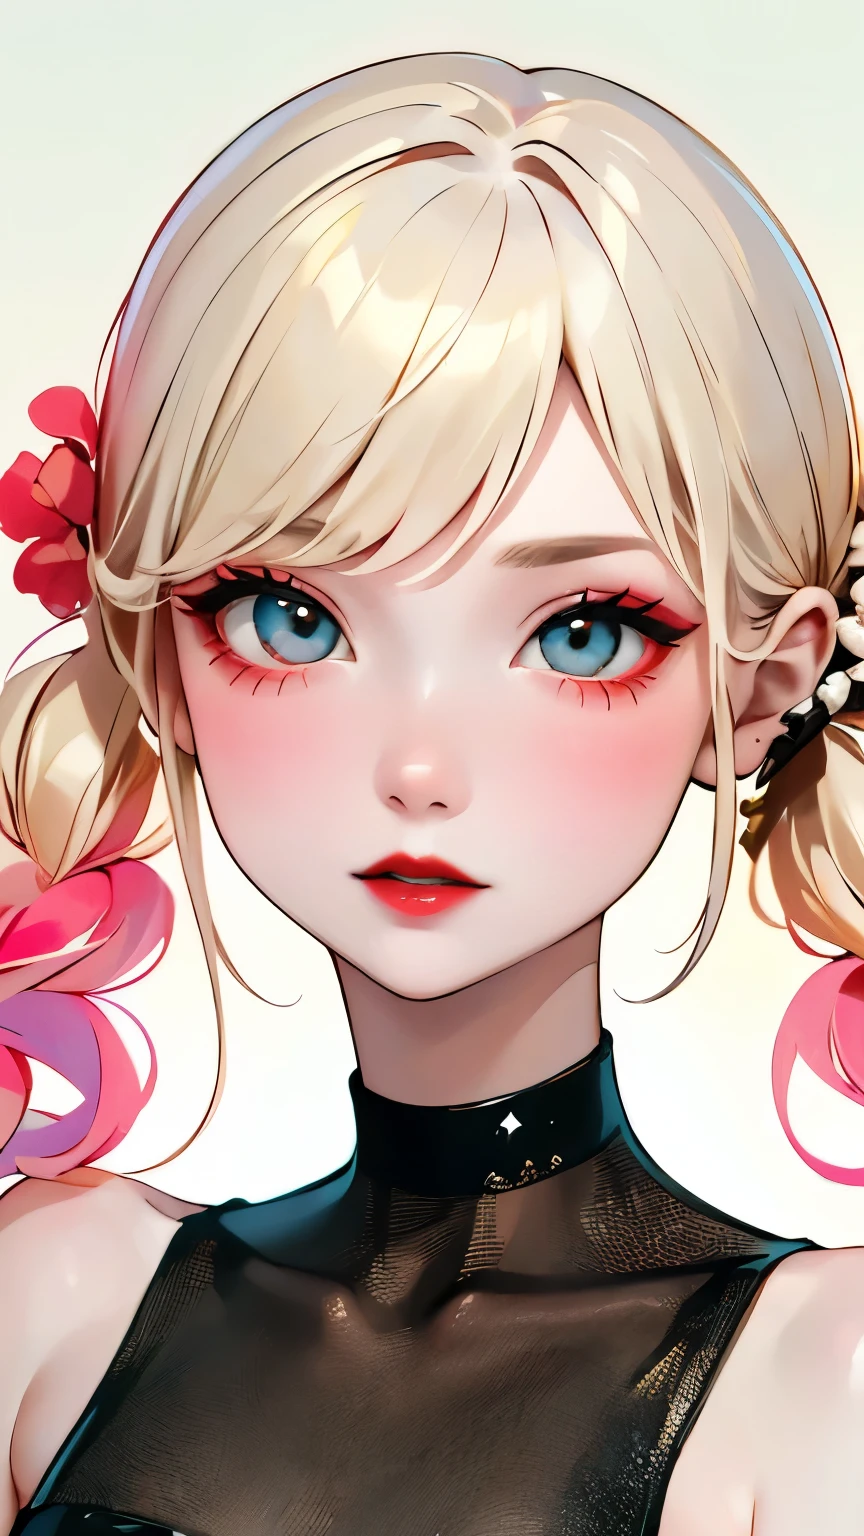 Long Shot、One Girl:1.5、Cute baby face、１４Year、Perfect Anatomy、Red eyeshadow、Red lipstick、Slightly pink cheeks、White skin、Ash Blonde、Black Dress、eight-headed body、small 、Unique hairstyles、choker、highest quality、Very detailed、High quality details、Portraiture、Masseter region